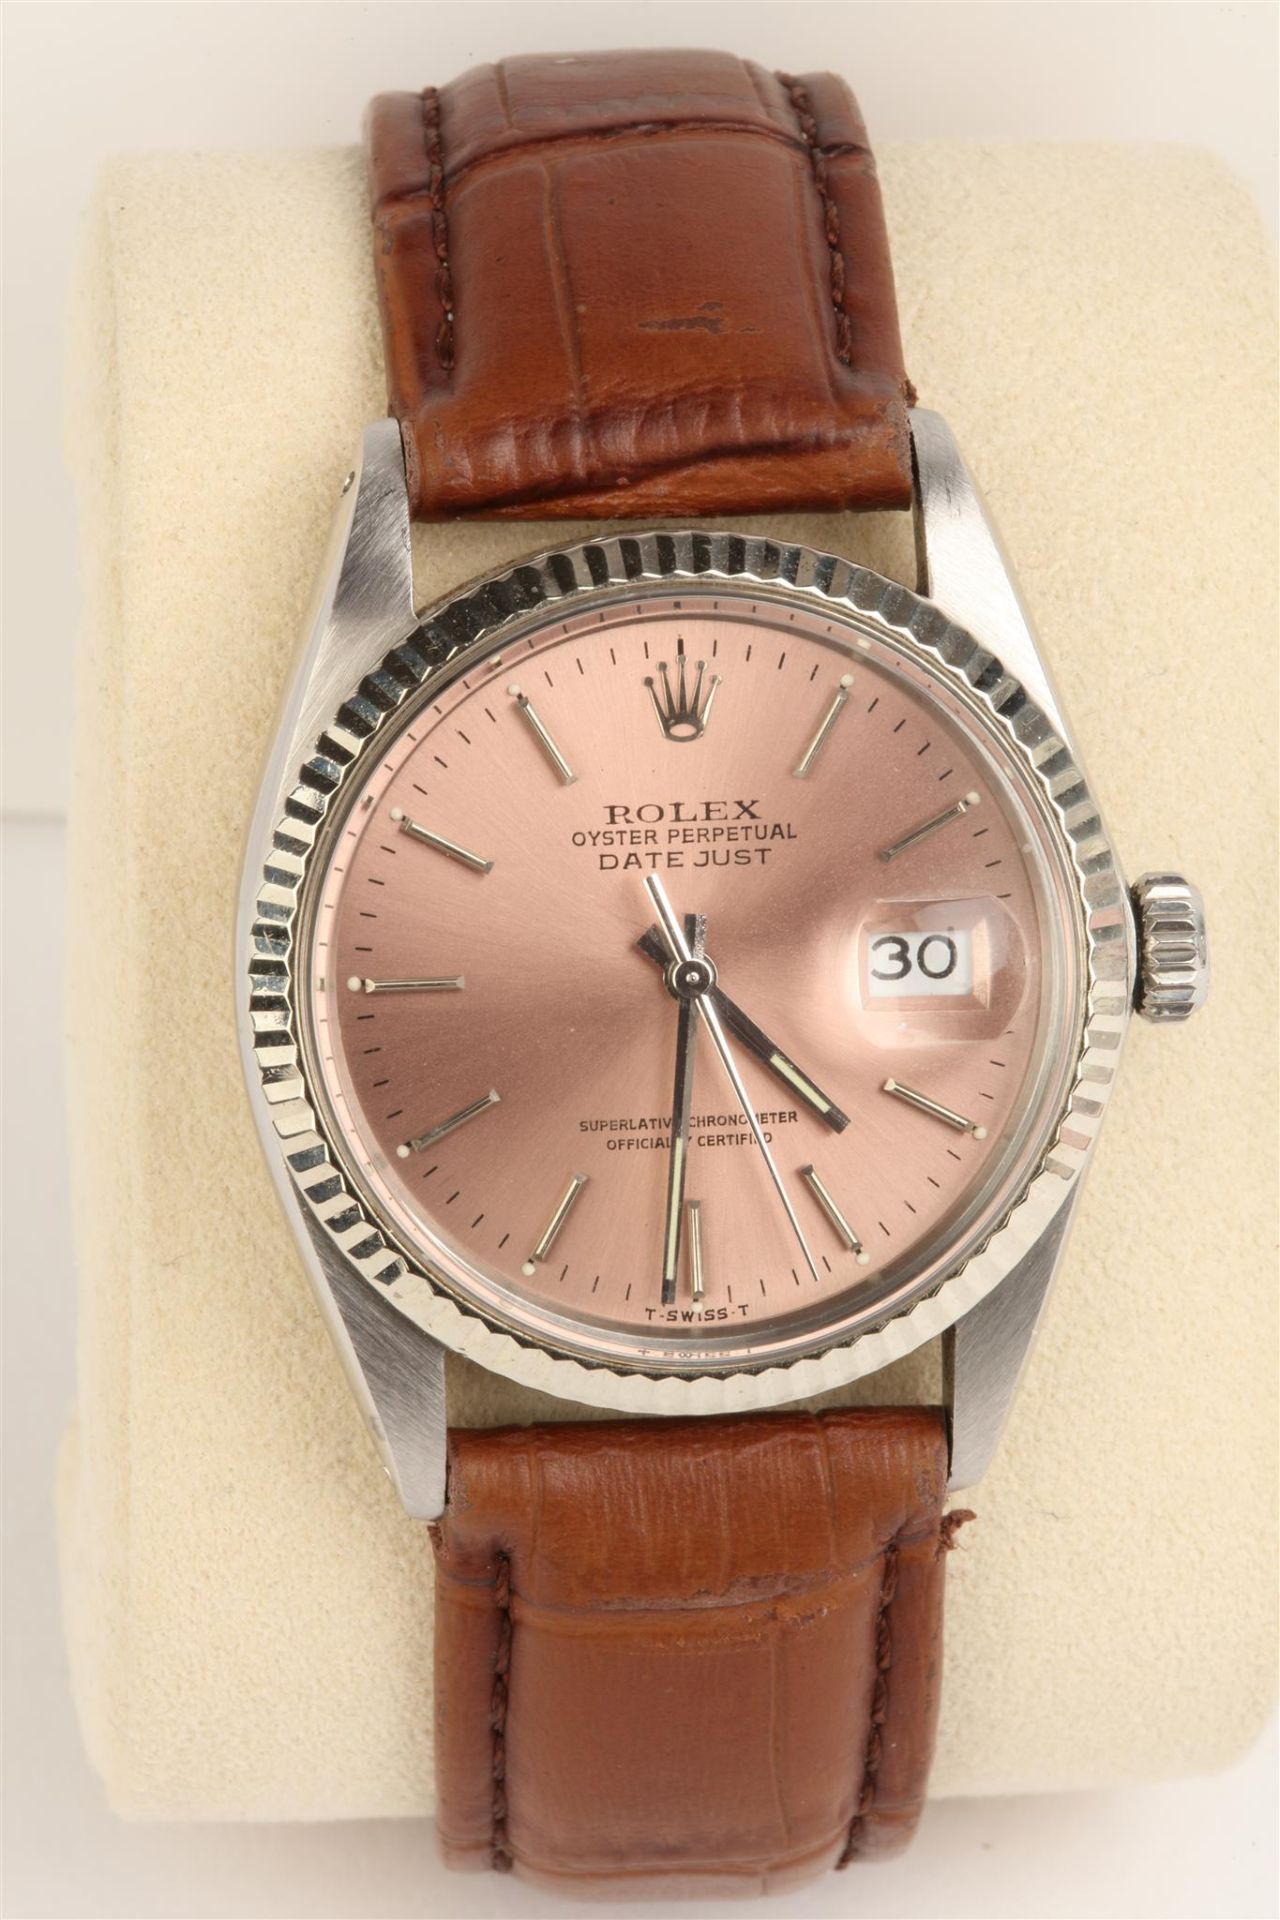 No VAT Gents Rolex Oyster Perpetual Date Just Watch With Brown Leather Rolex Strap